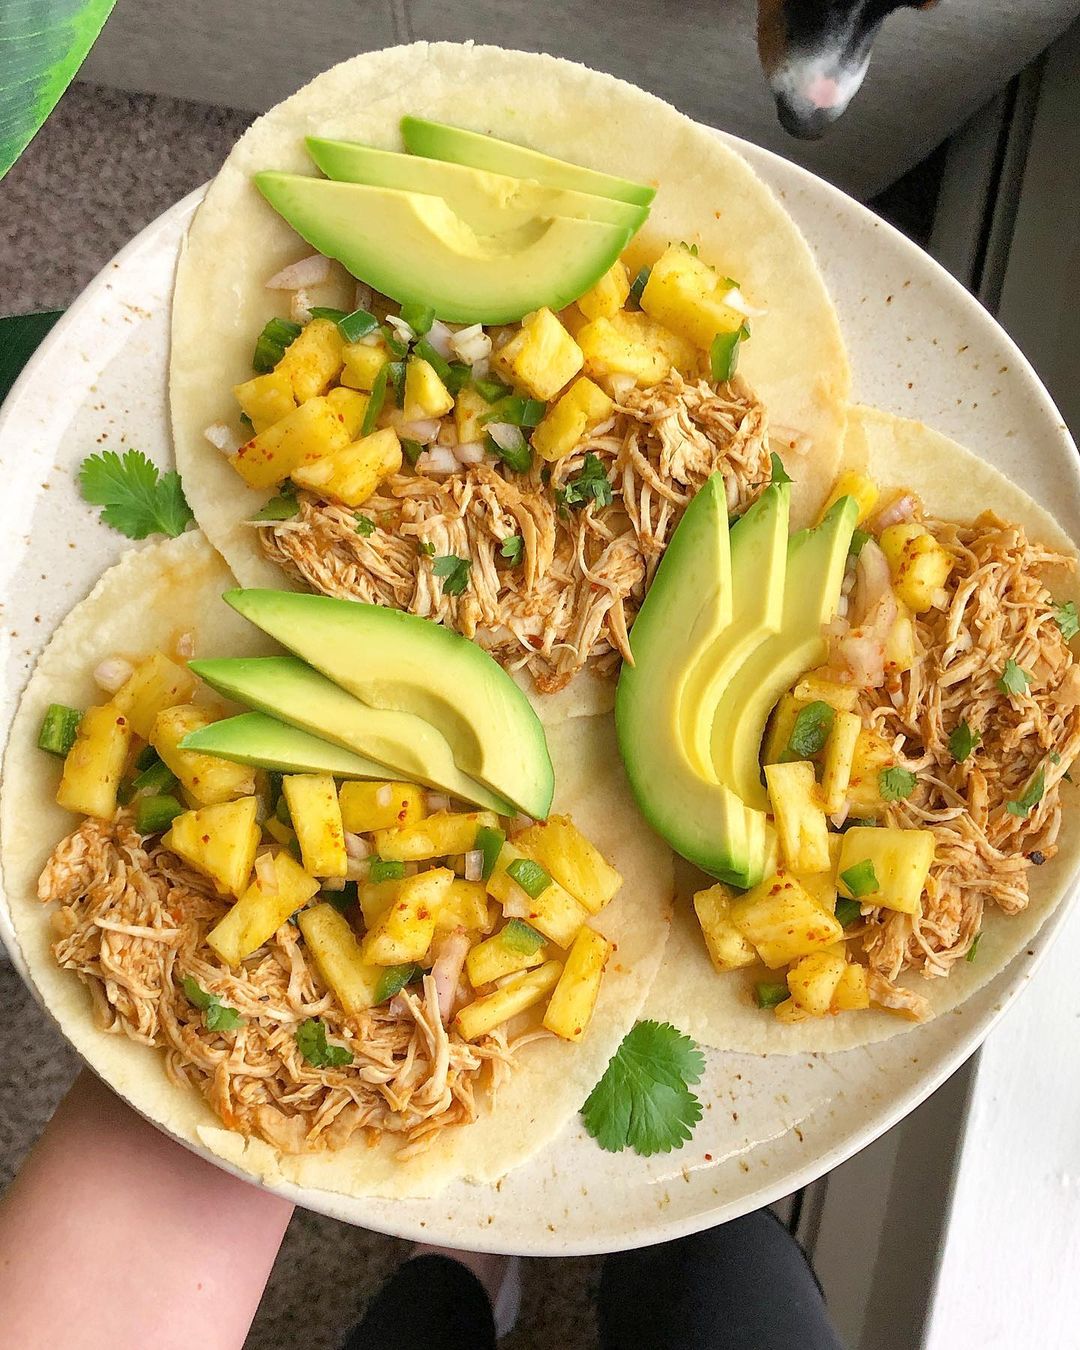 Chicken Tacooos with Pineapple Salsa & Avocado in Almond Flour